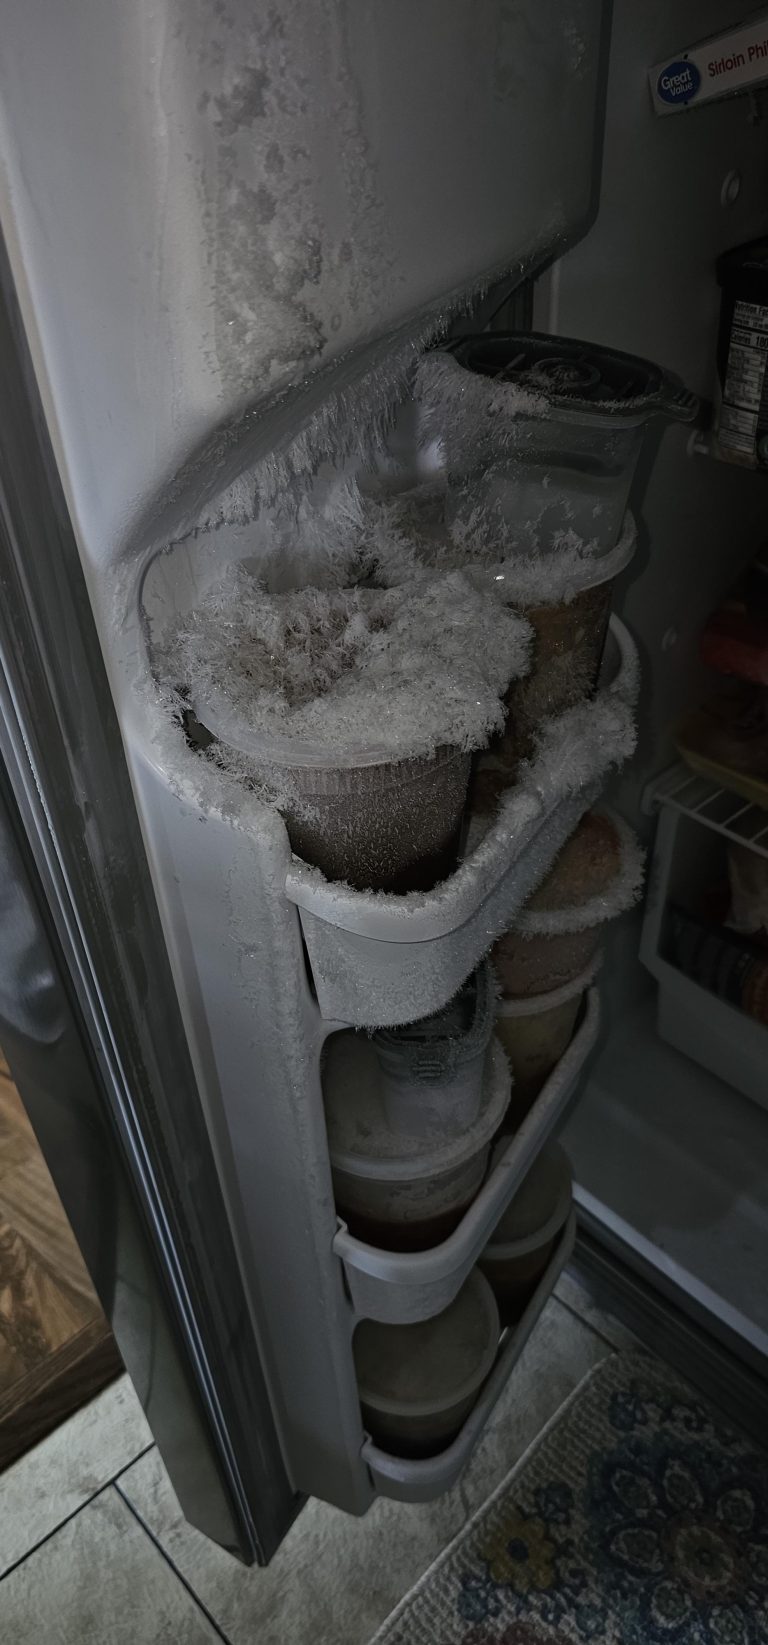 Freezer Door Left Open a Crack: Prevent Spoiled Food with These Power Tips